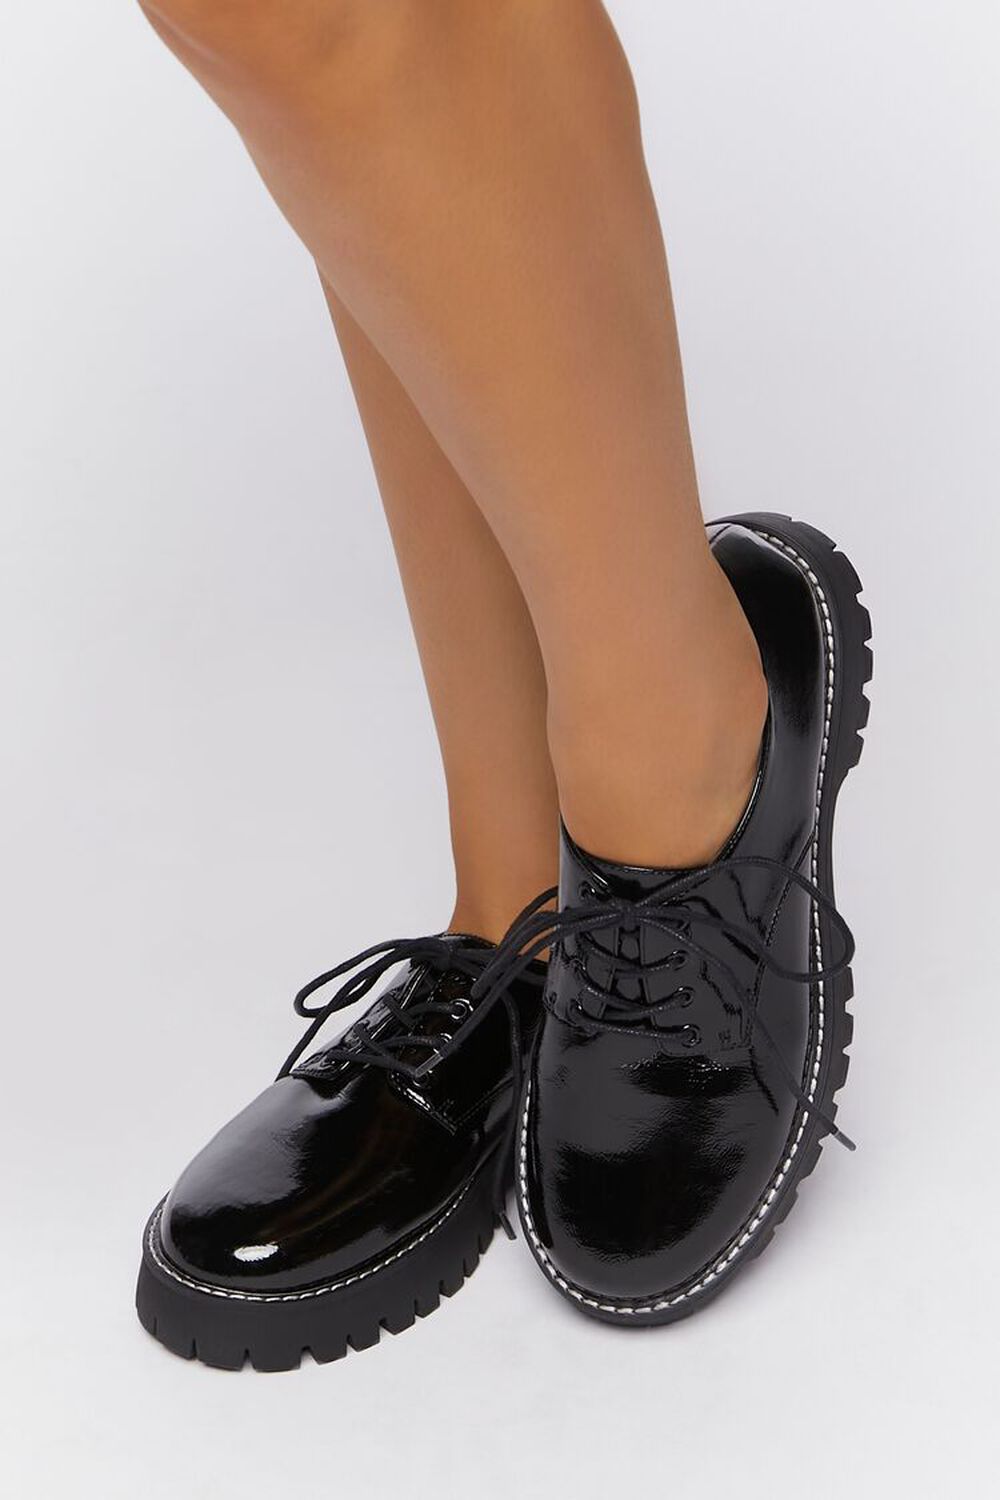 BLACK Faux Patent Leather Oxford Sneakers, image 1